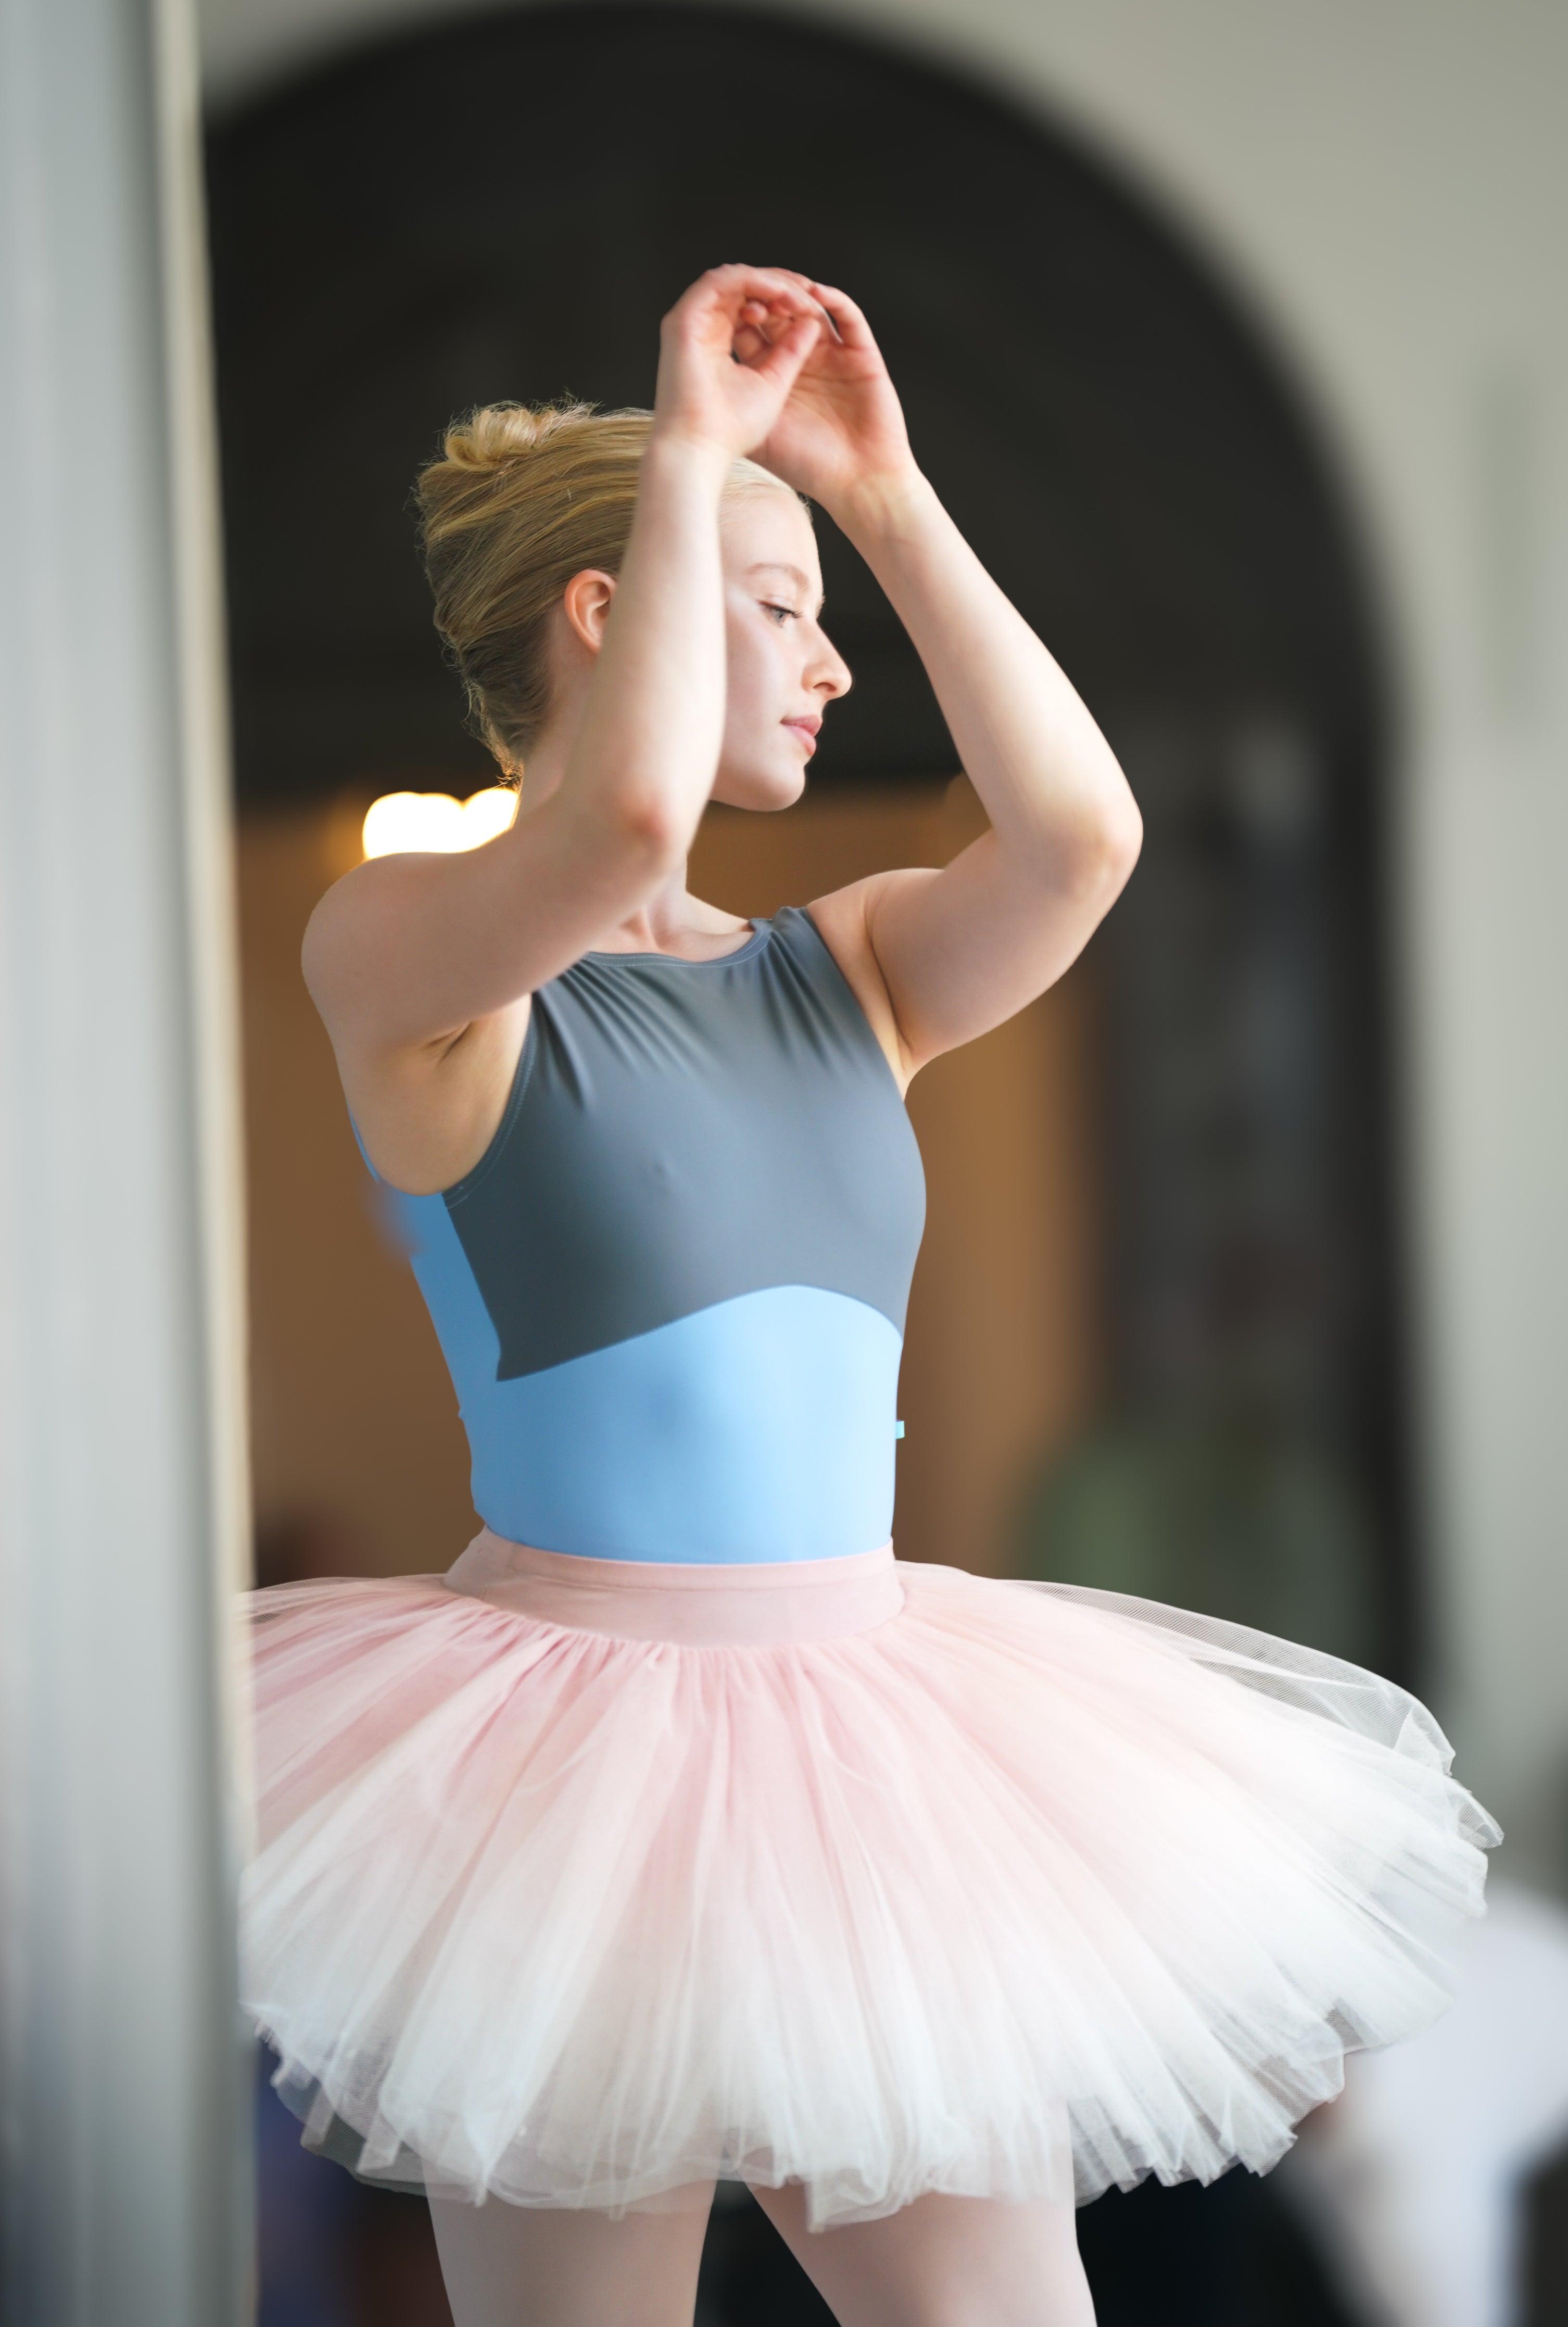 Women's Freedom Boatneck Tank Style Ballet Leotard in River Blue with Grey with Tutu